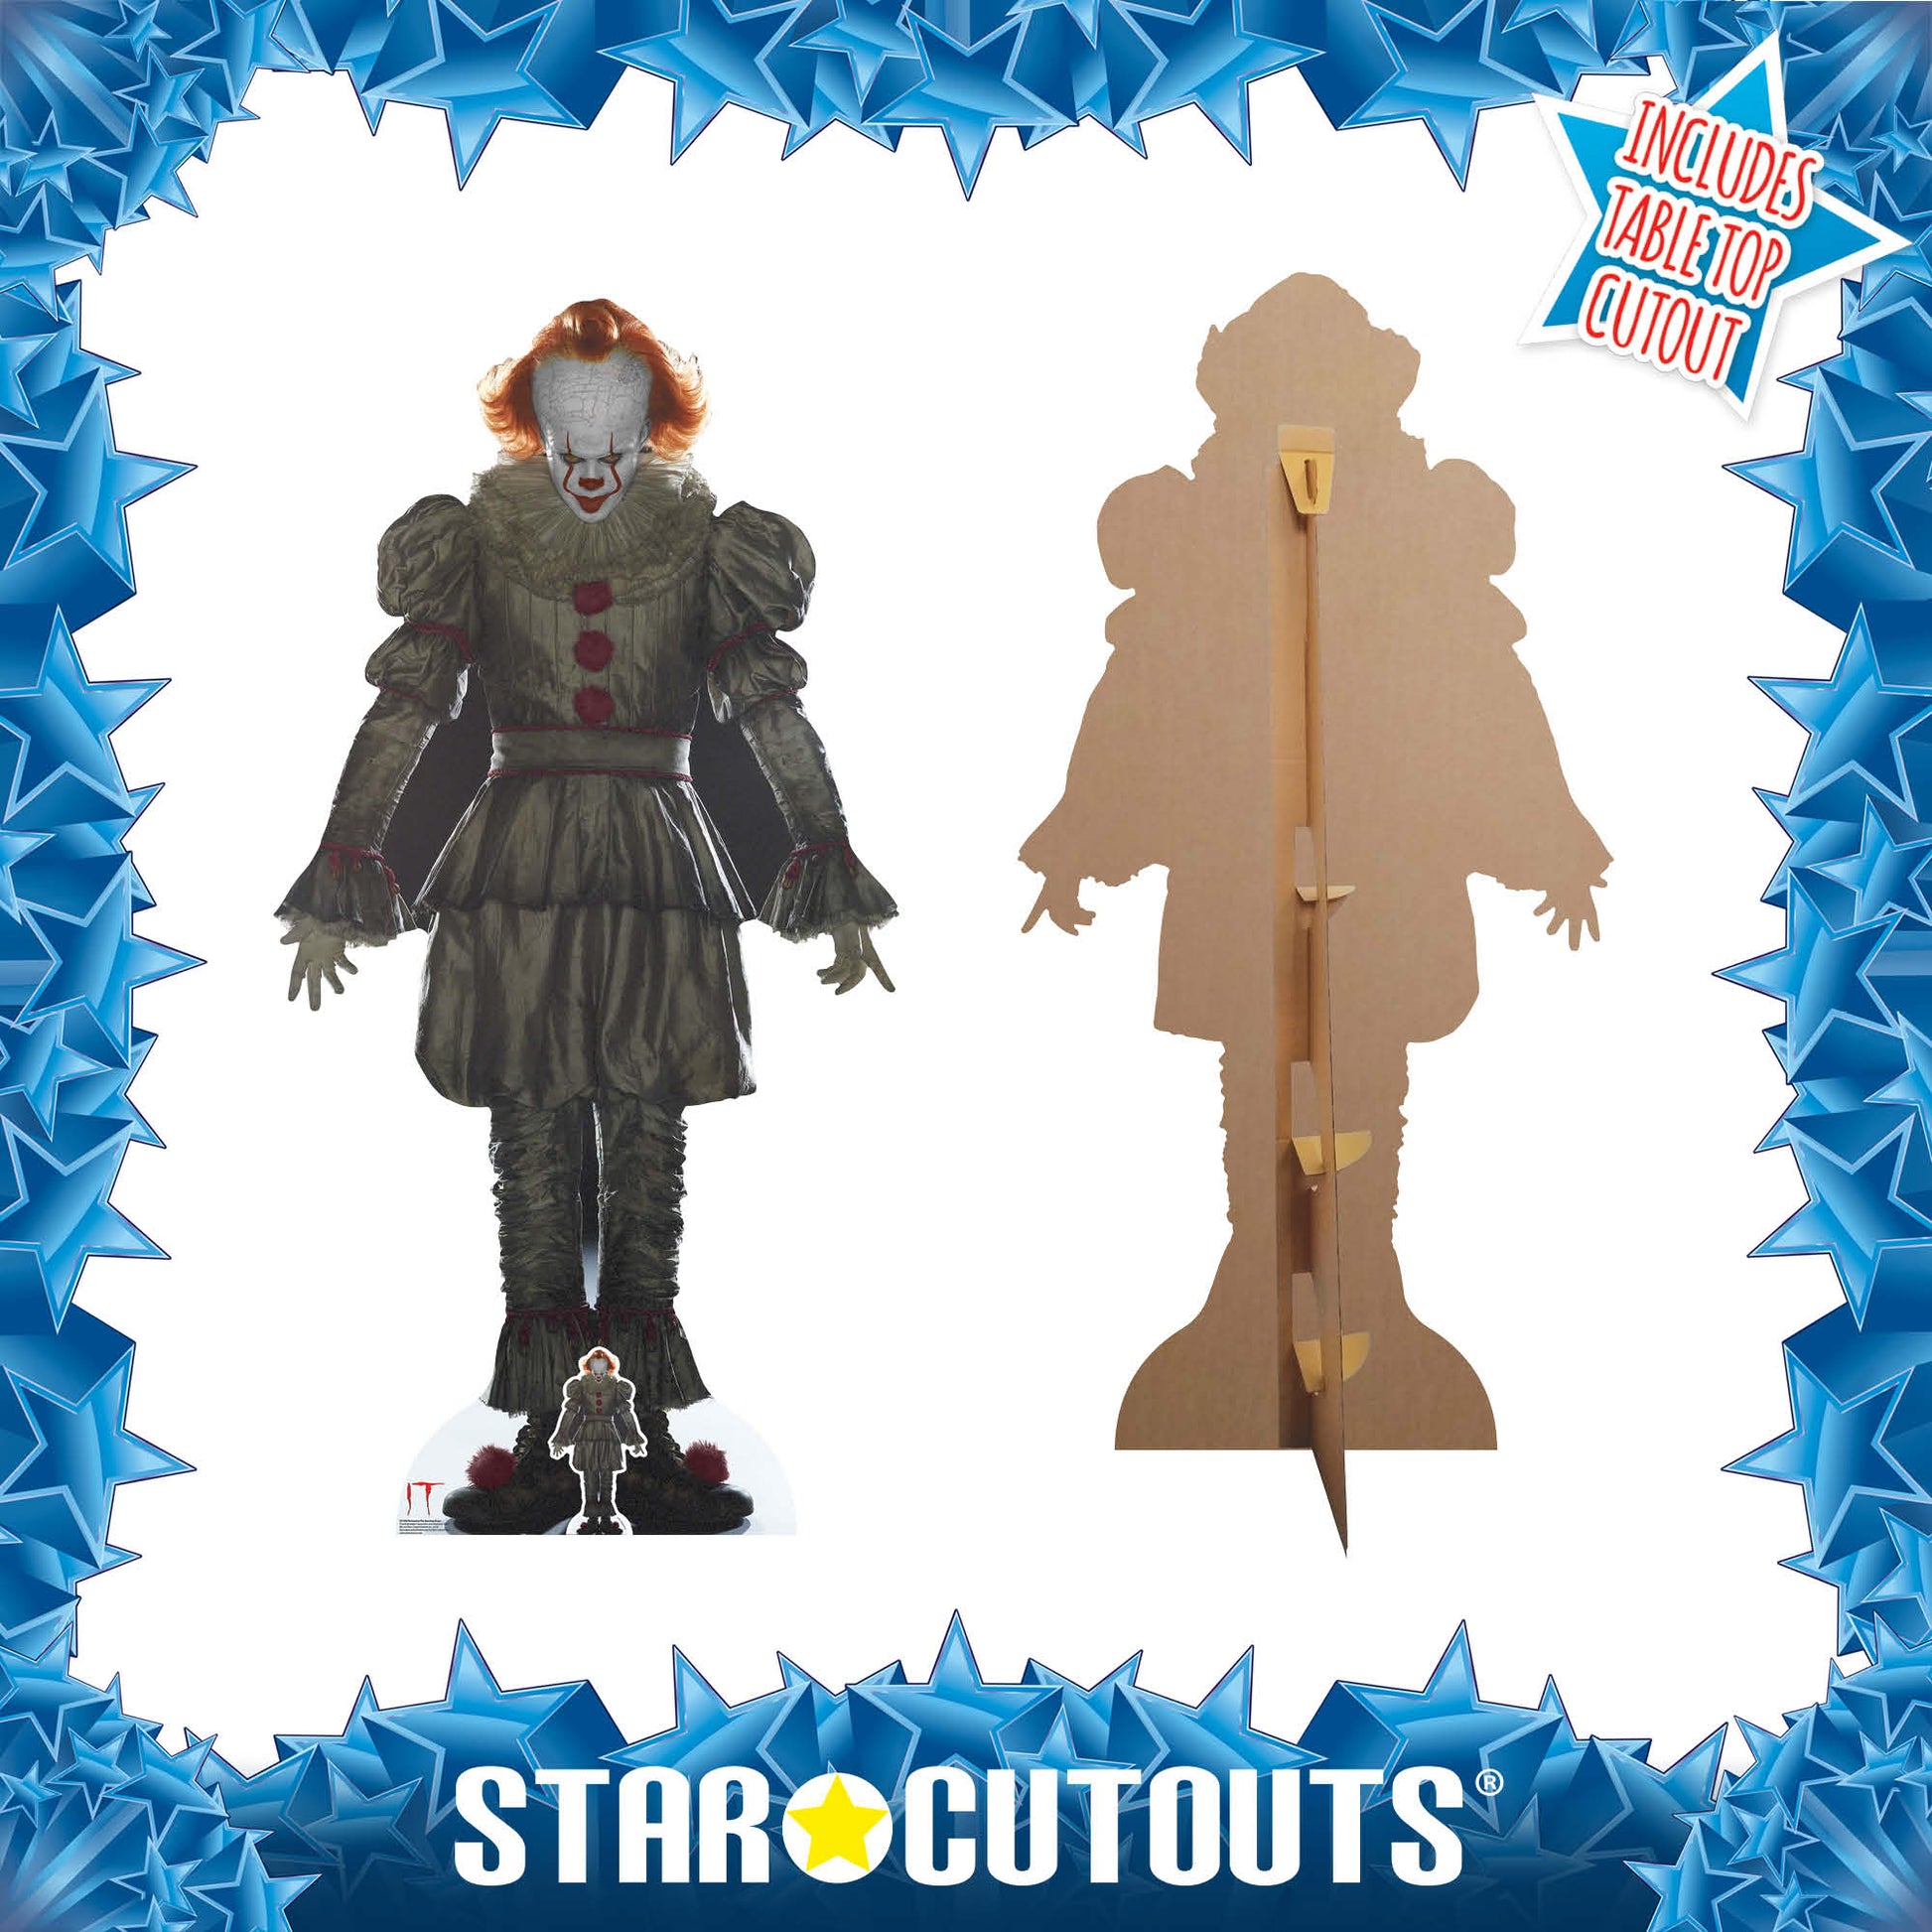 Pennywise cardboard cutout front and back image